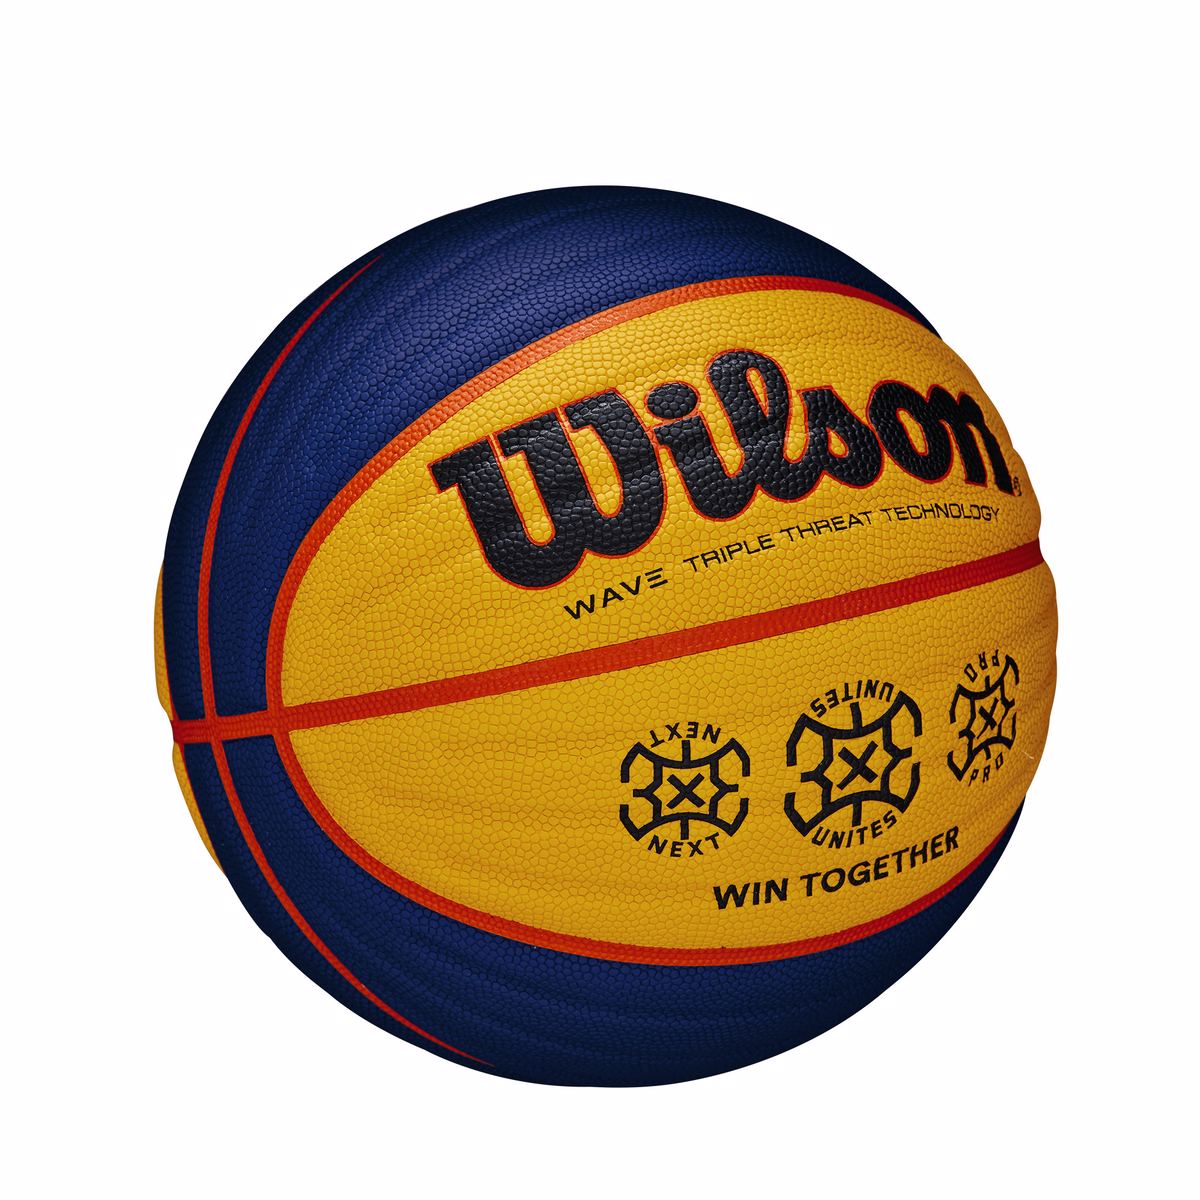 WZ1001801XB_1_6F_FIBA_3X3_Unit_Win_Together_Official_BL_YE_BU_OR.png.high-res_1200x1200